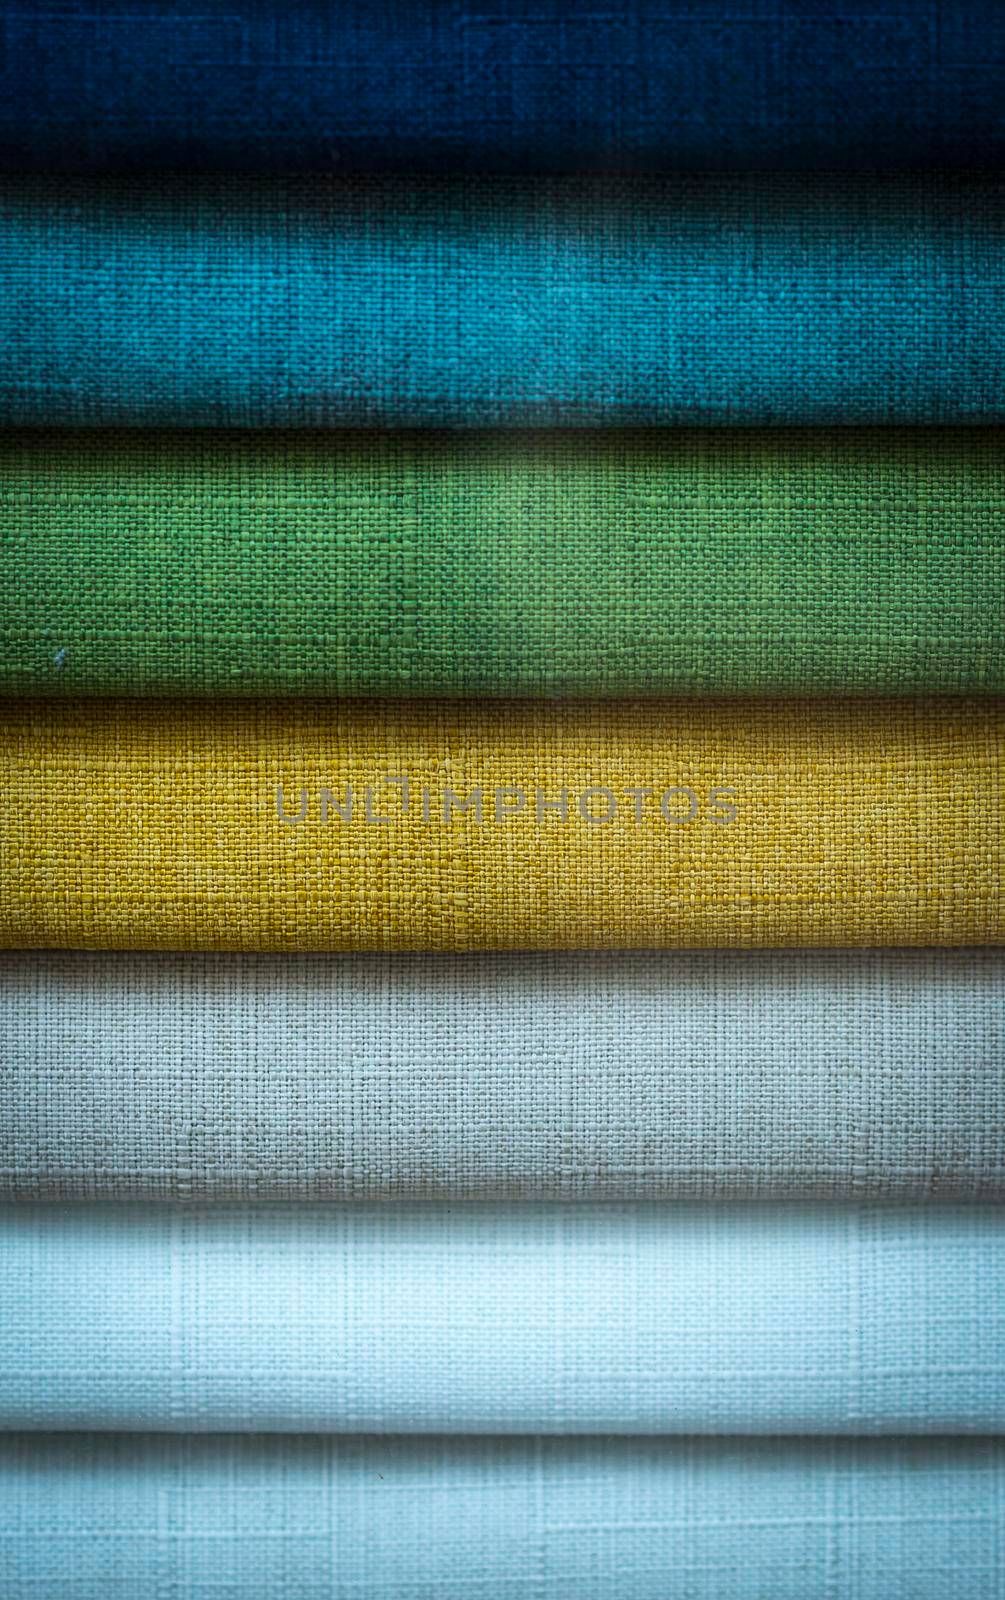 A Stack of some colored fabrics by raferto1973